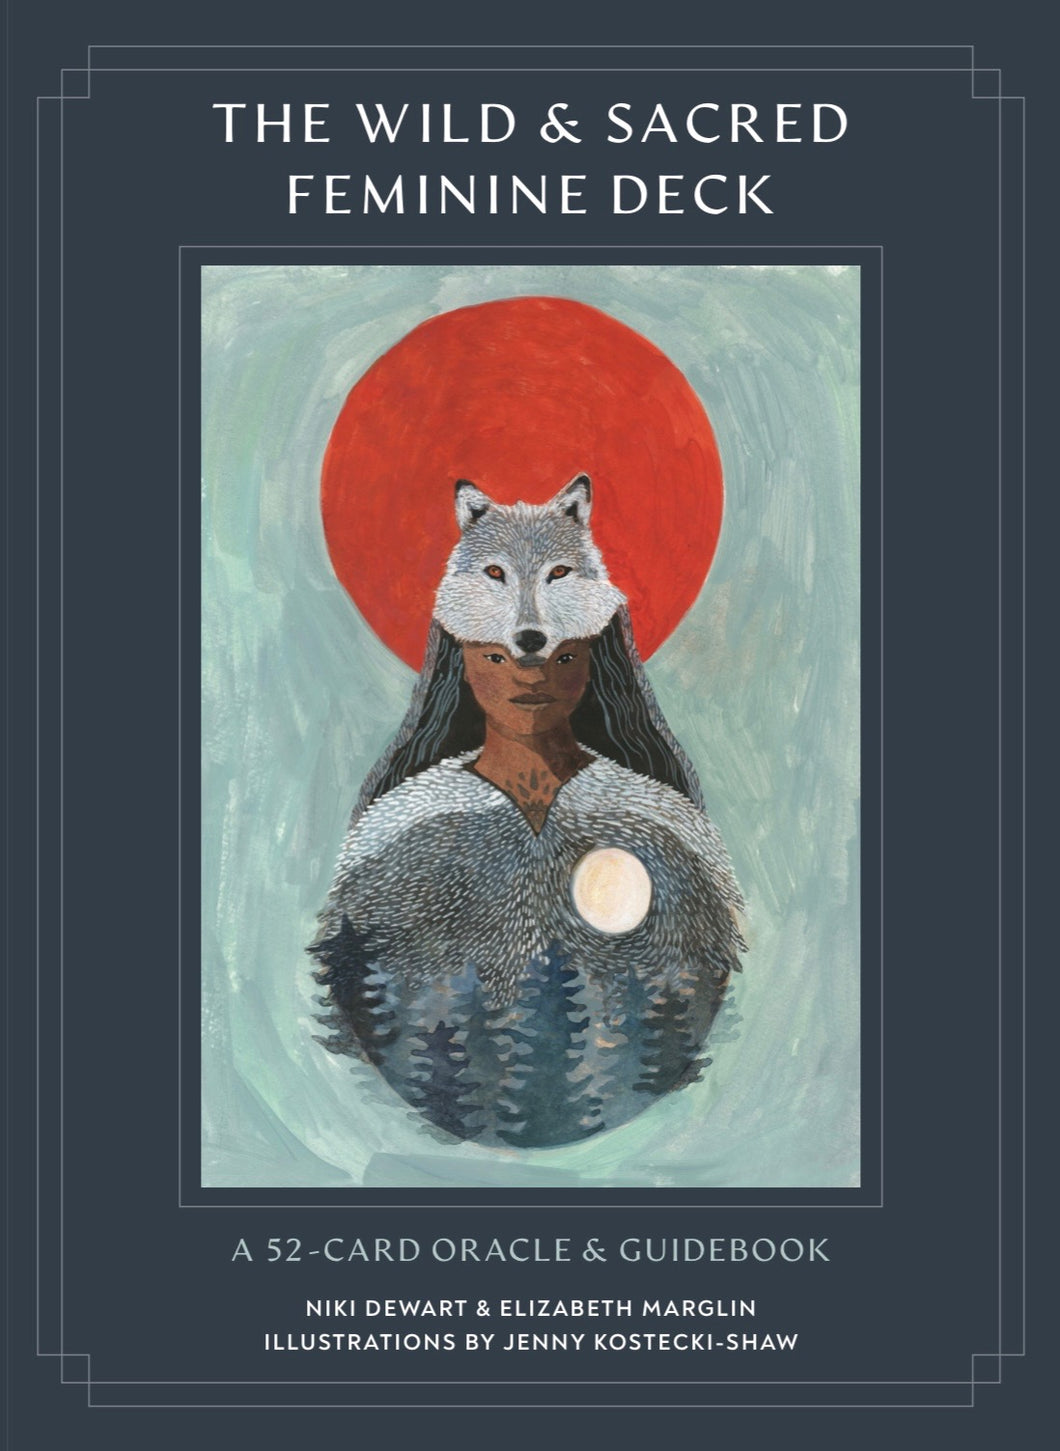 The Wild & Sacred Feminine Deck: An Introduction to the Divinatory Arts (Ages 18+)